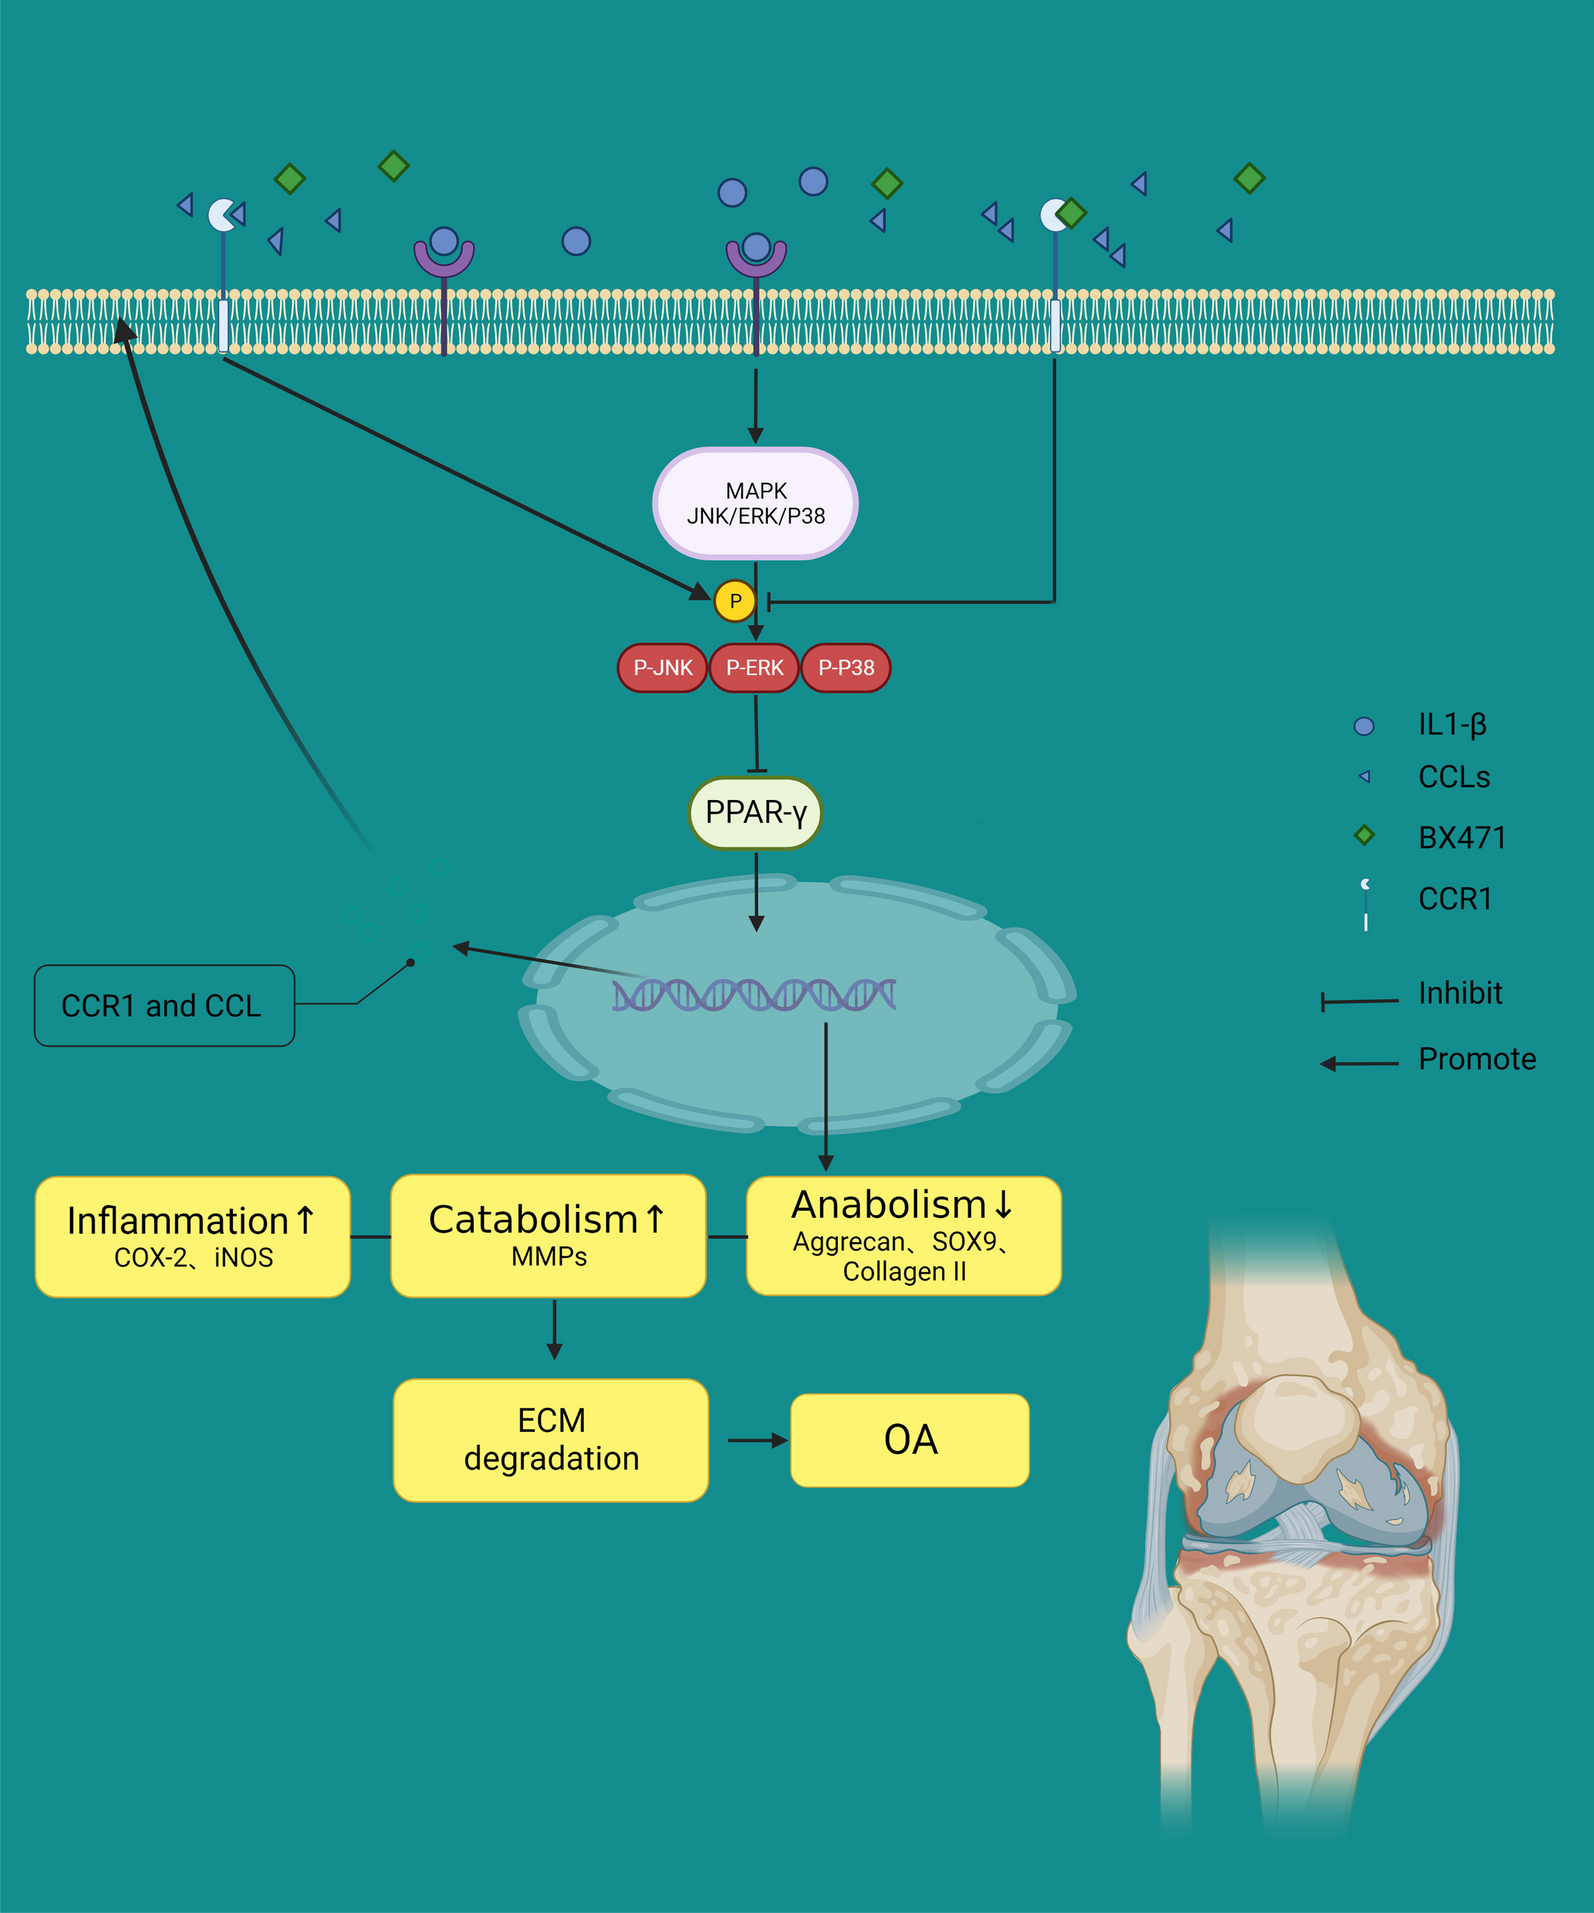 Inhibition of CC chemokine receptor 1 ameliorates osteoarthritis in mouse by activating PPAR-γ